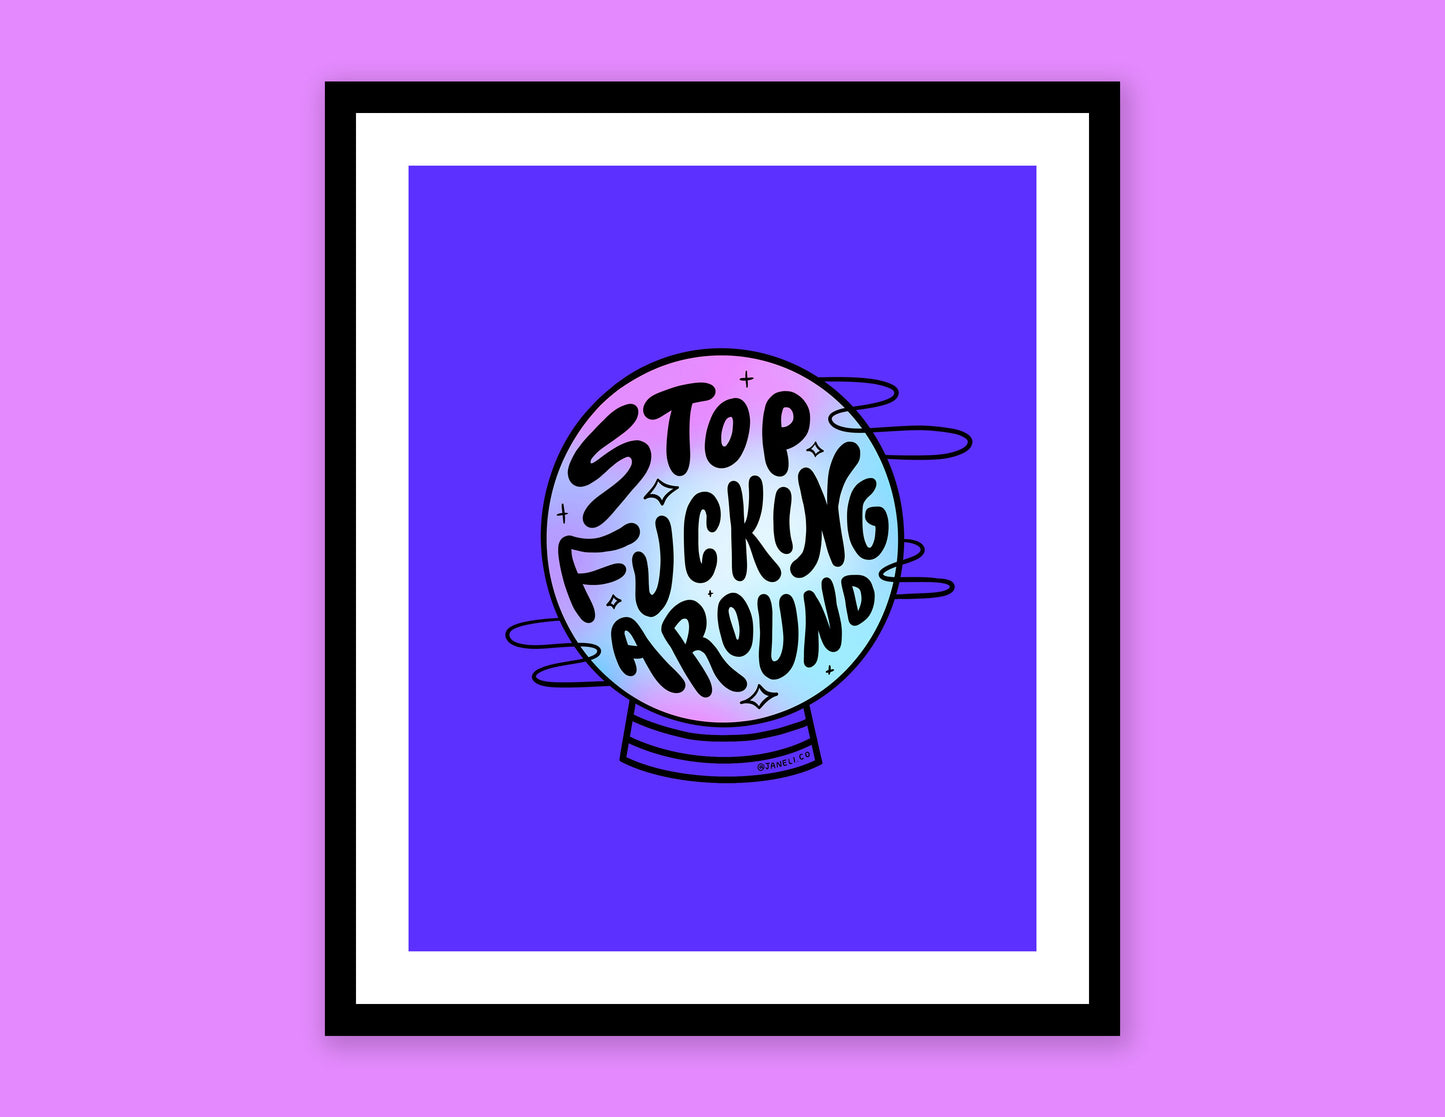 A digital mock of a framed JaneLi.Co print that says "Stop Fucking Around" in the shape of a magic crystal ball over a purple background.